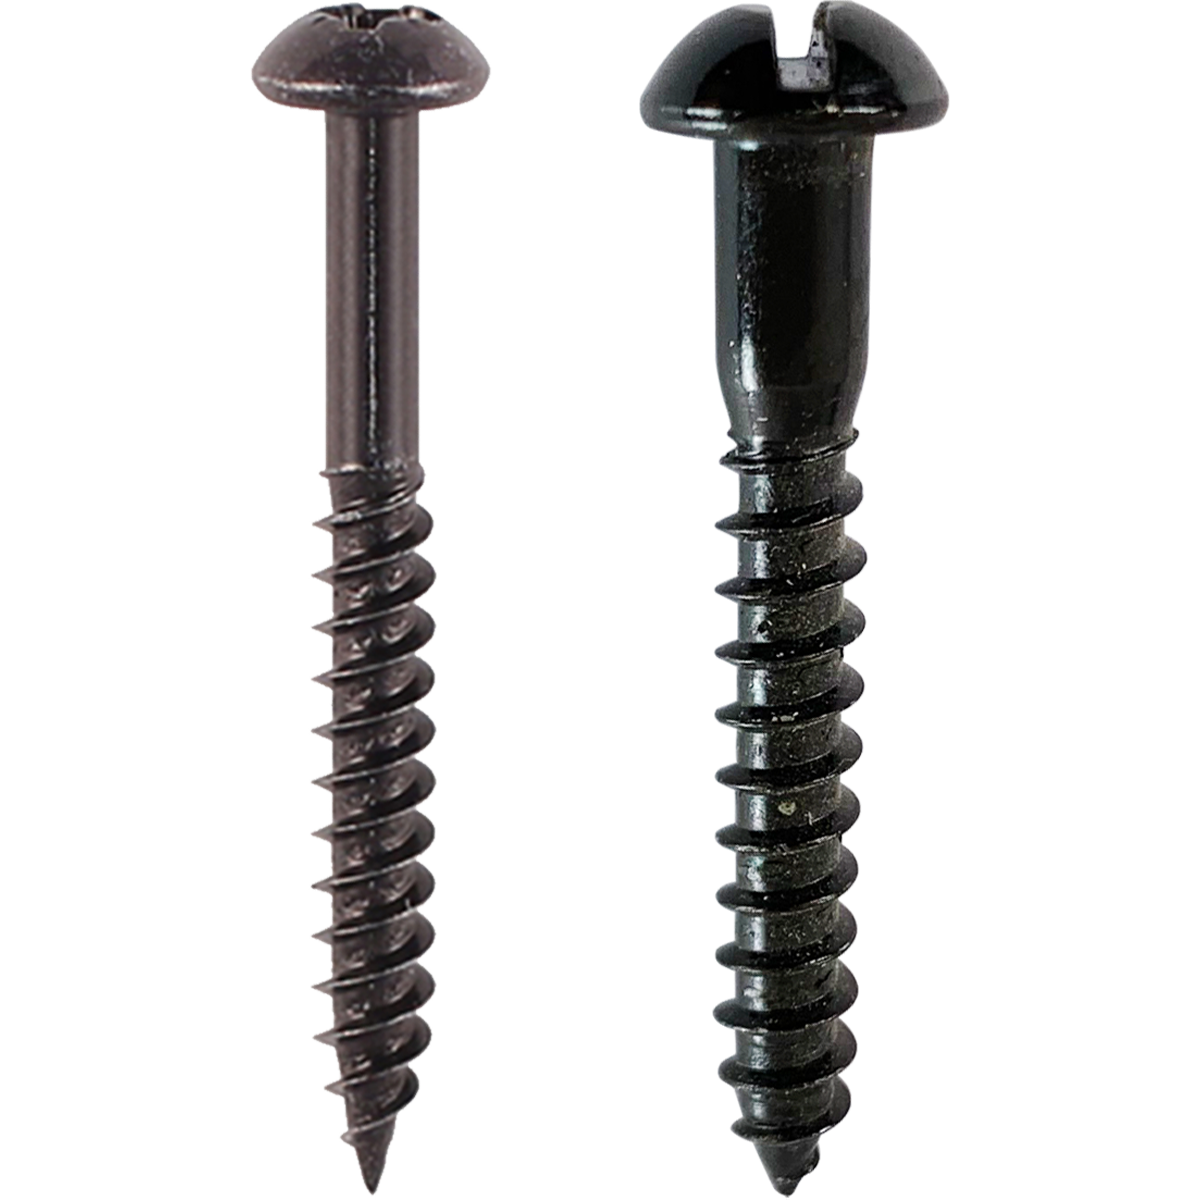 Black wood screws in carbon steel and coated for corrosion resistance.